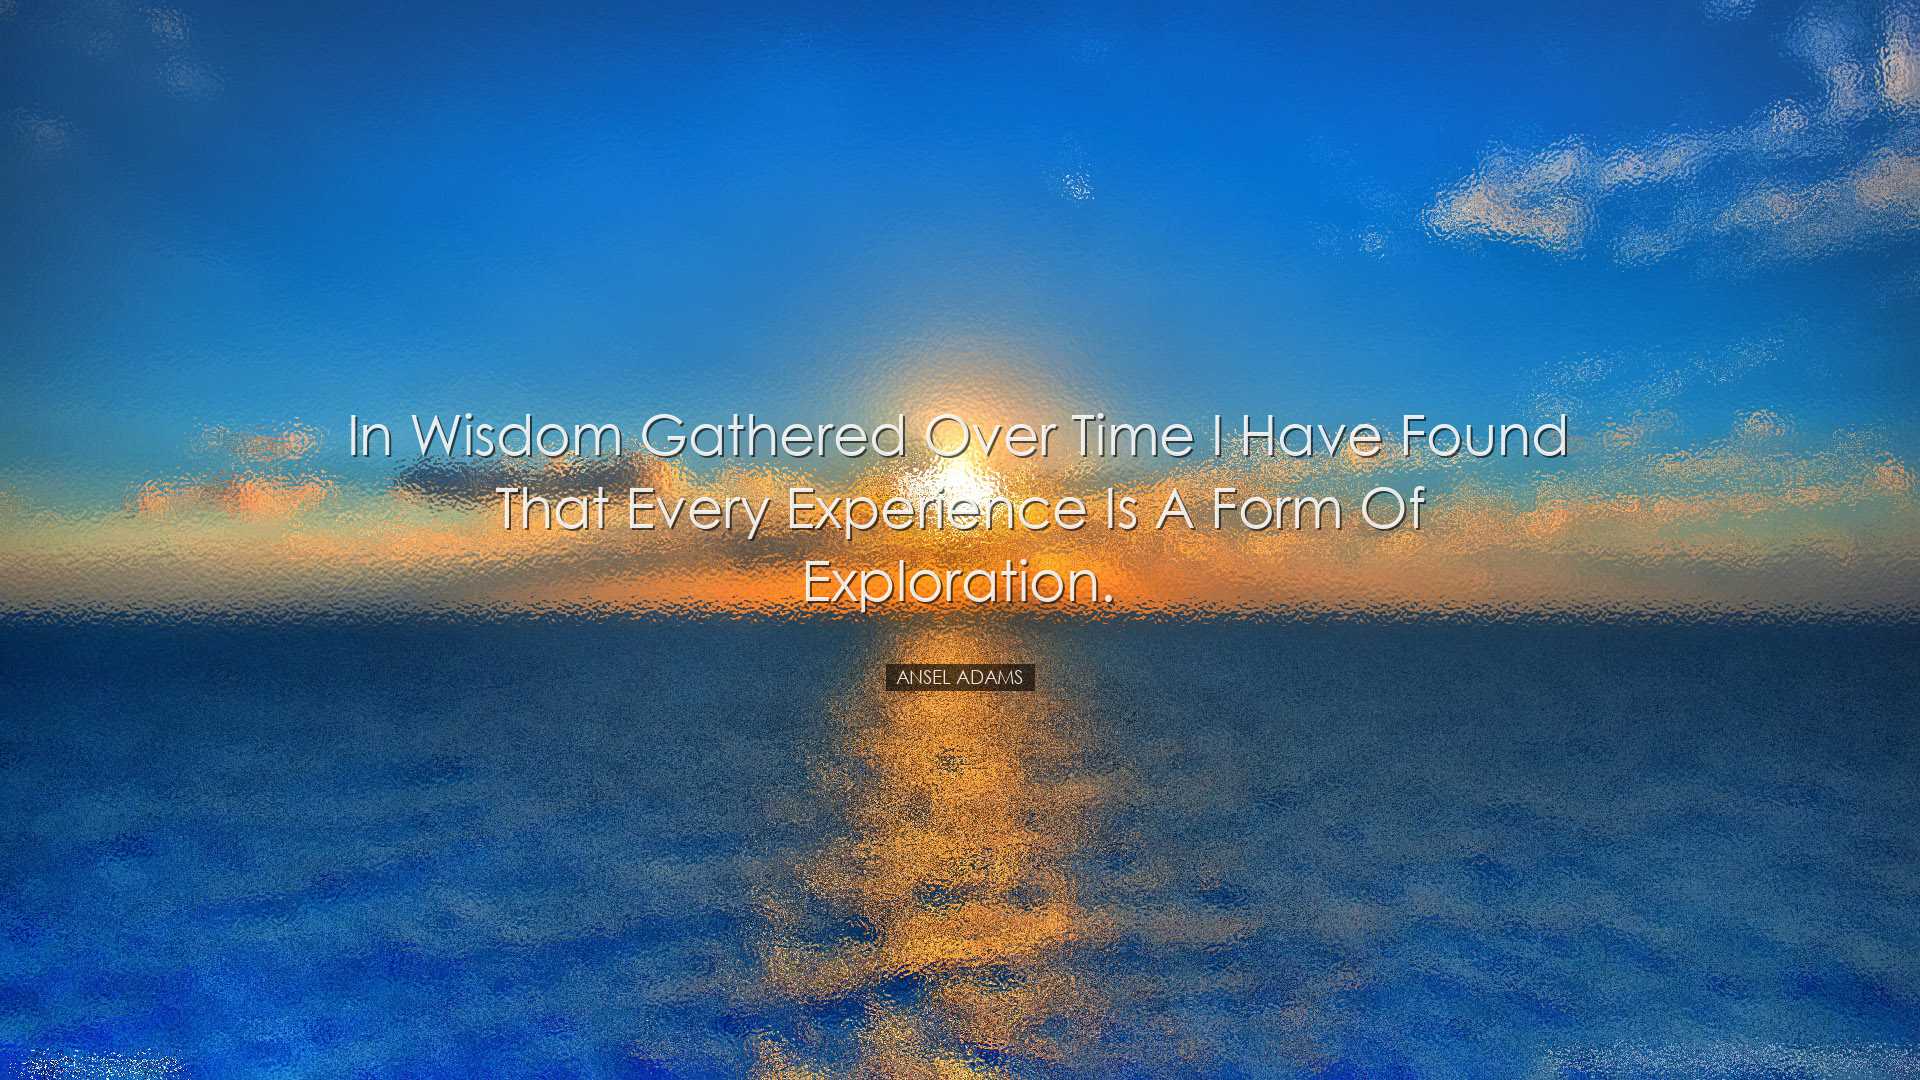 In wisdom gathered over time I have found that every experience is